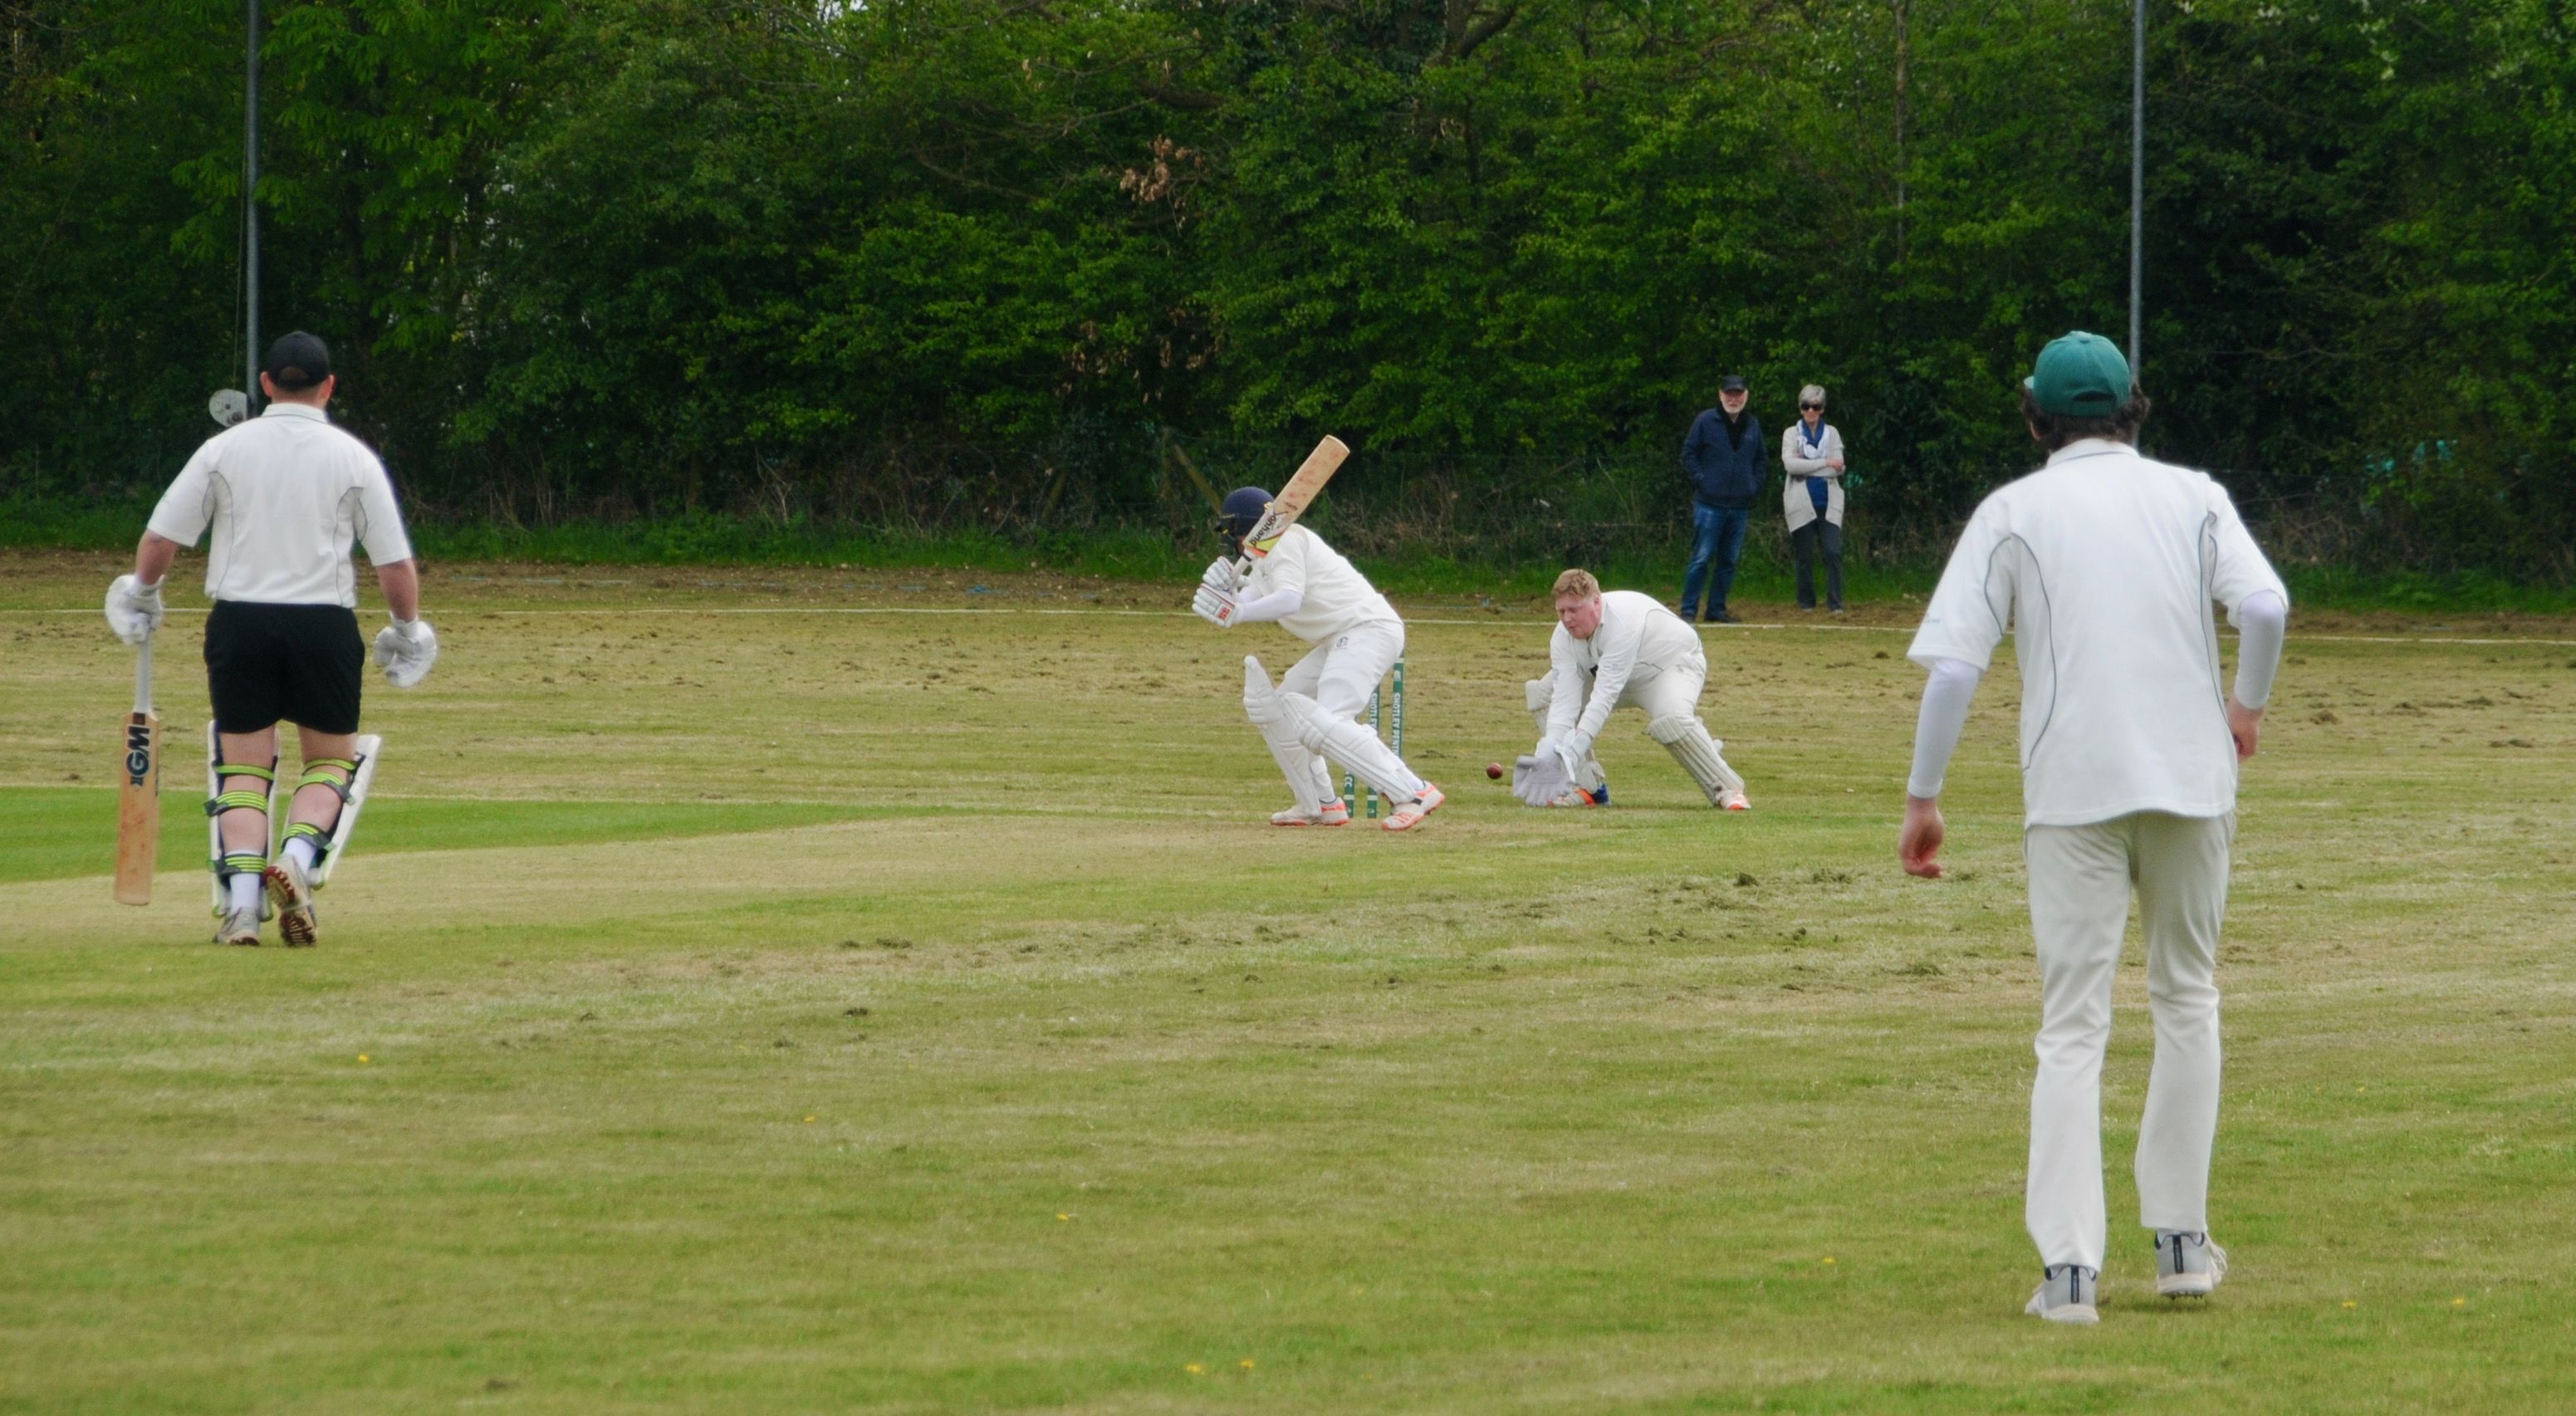 Wicket keeper in action